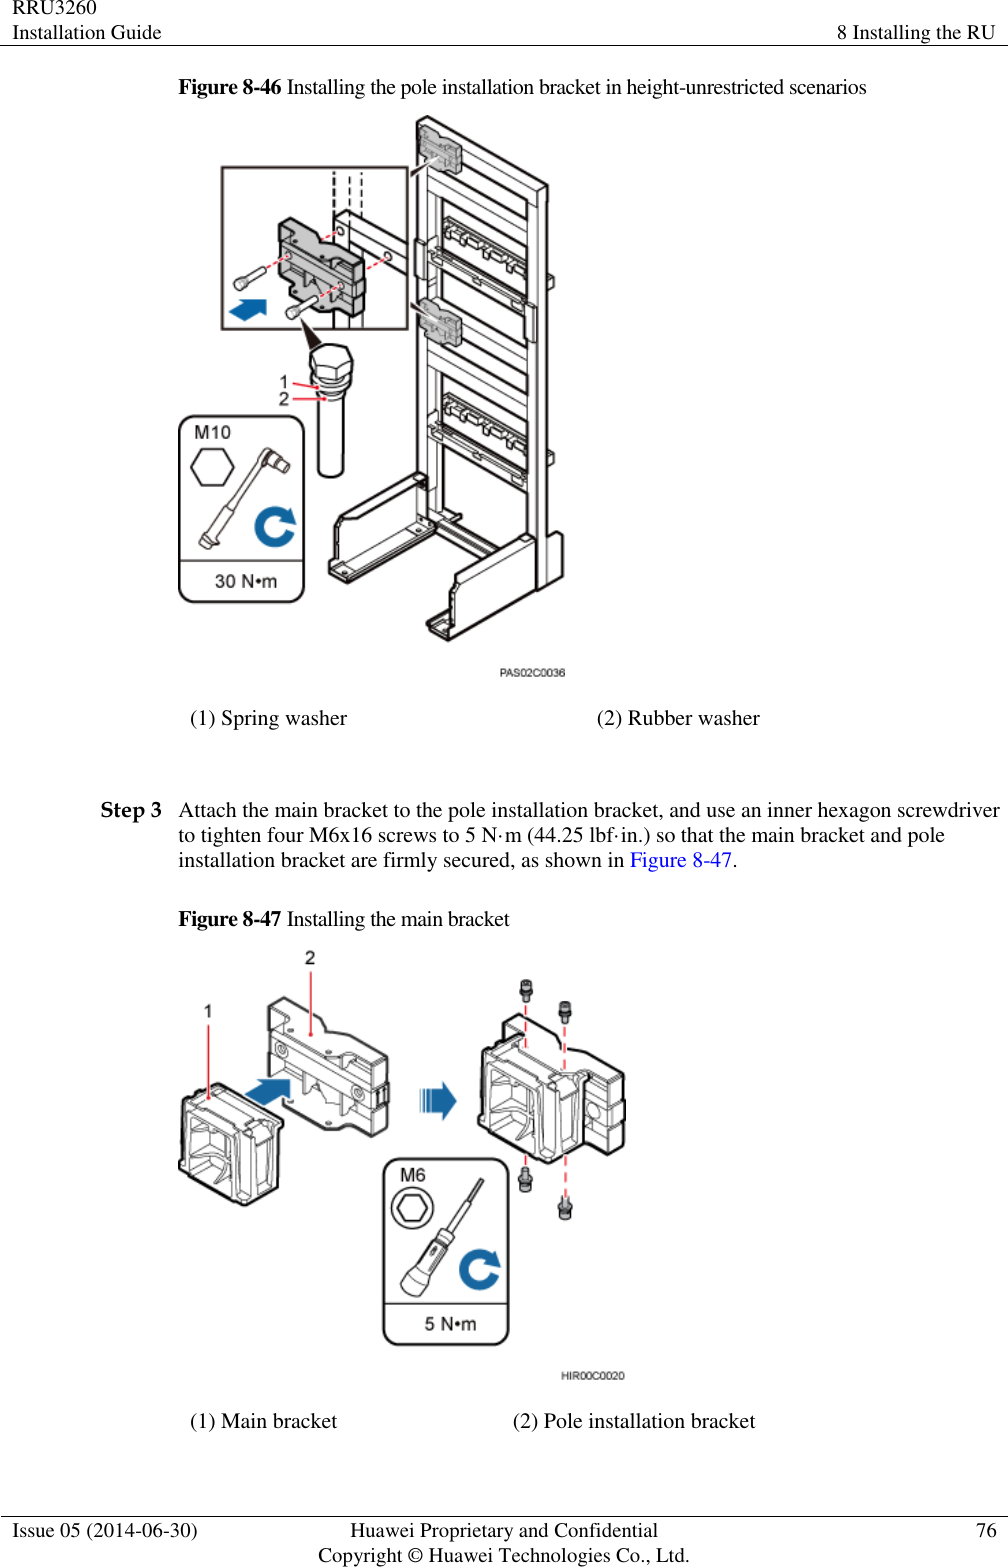 RRU3260 Installation Guide 8 Installing the RU  Issue 05 (2014-06-30) Huawei Proprietary and Confidential                                     Copyright © Huawei Technologies Co., Ltd. 76  Figure 8-46 Installing the pole installation bracket in height-unrestricted scenarios  (1) Spring washer (2) Rubber washer  Step 3 Attach the main bracket to the pole installation bracket, and use an inner hexagon screwdriver to tighten four M6x16 screws to 5 N·m (44.25 lbf·in.) so that the main bracket and pole installation bracket are firmly secured, as shown in Figure 8-47. Figure 8-47 Installing the main bracket  (1) Main bracket (2) Pole installation bracket 